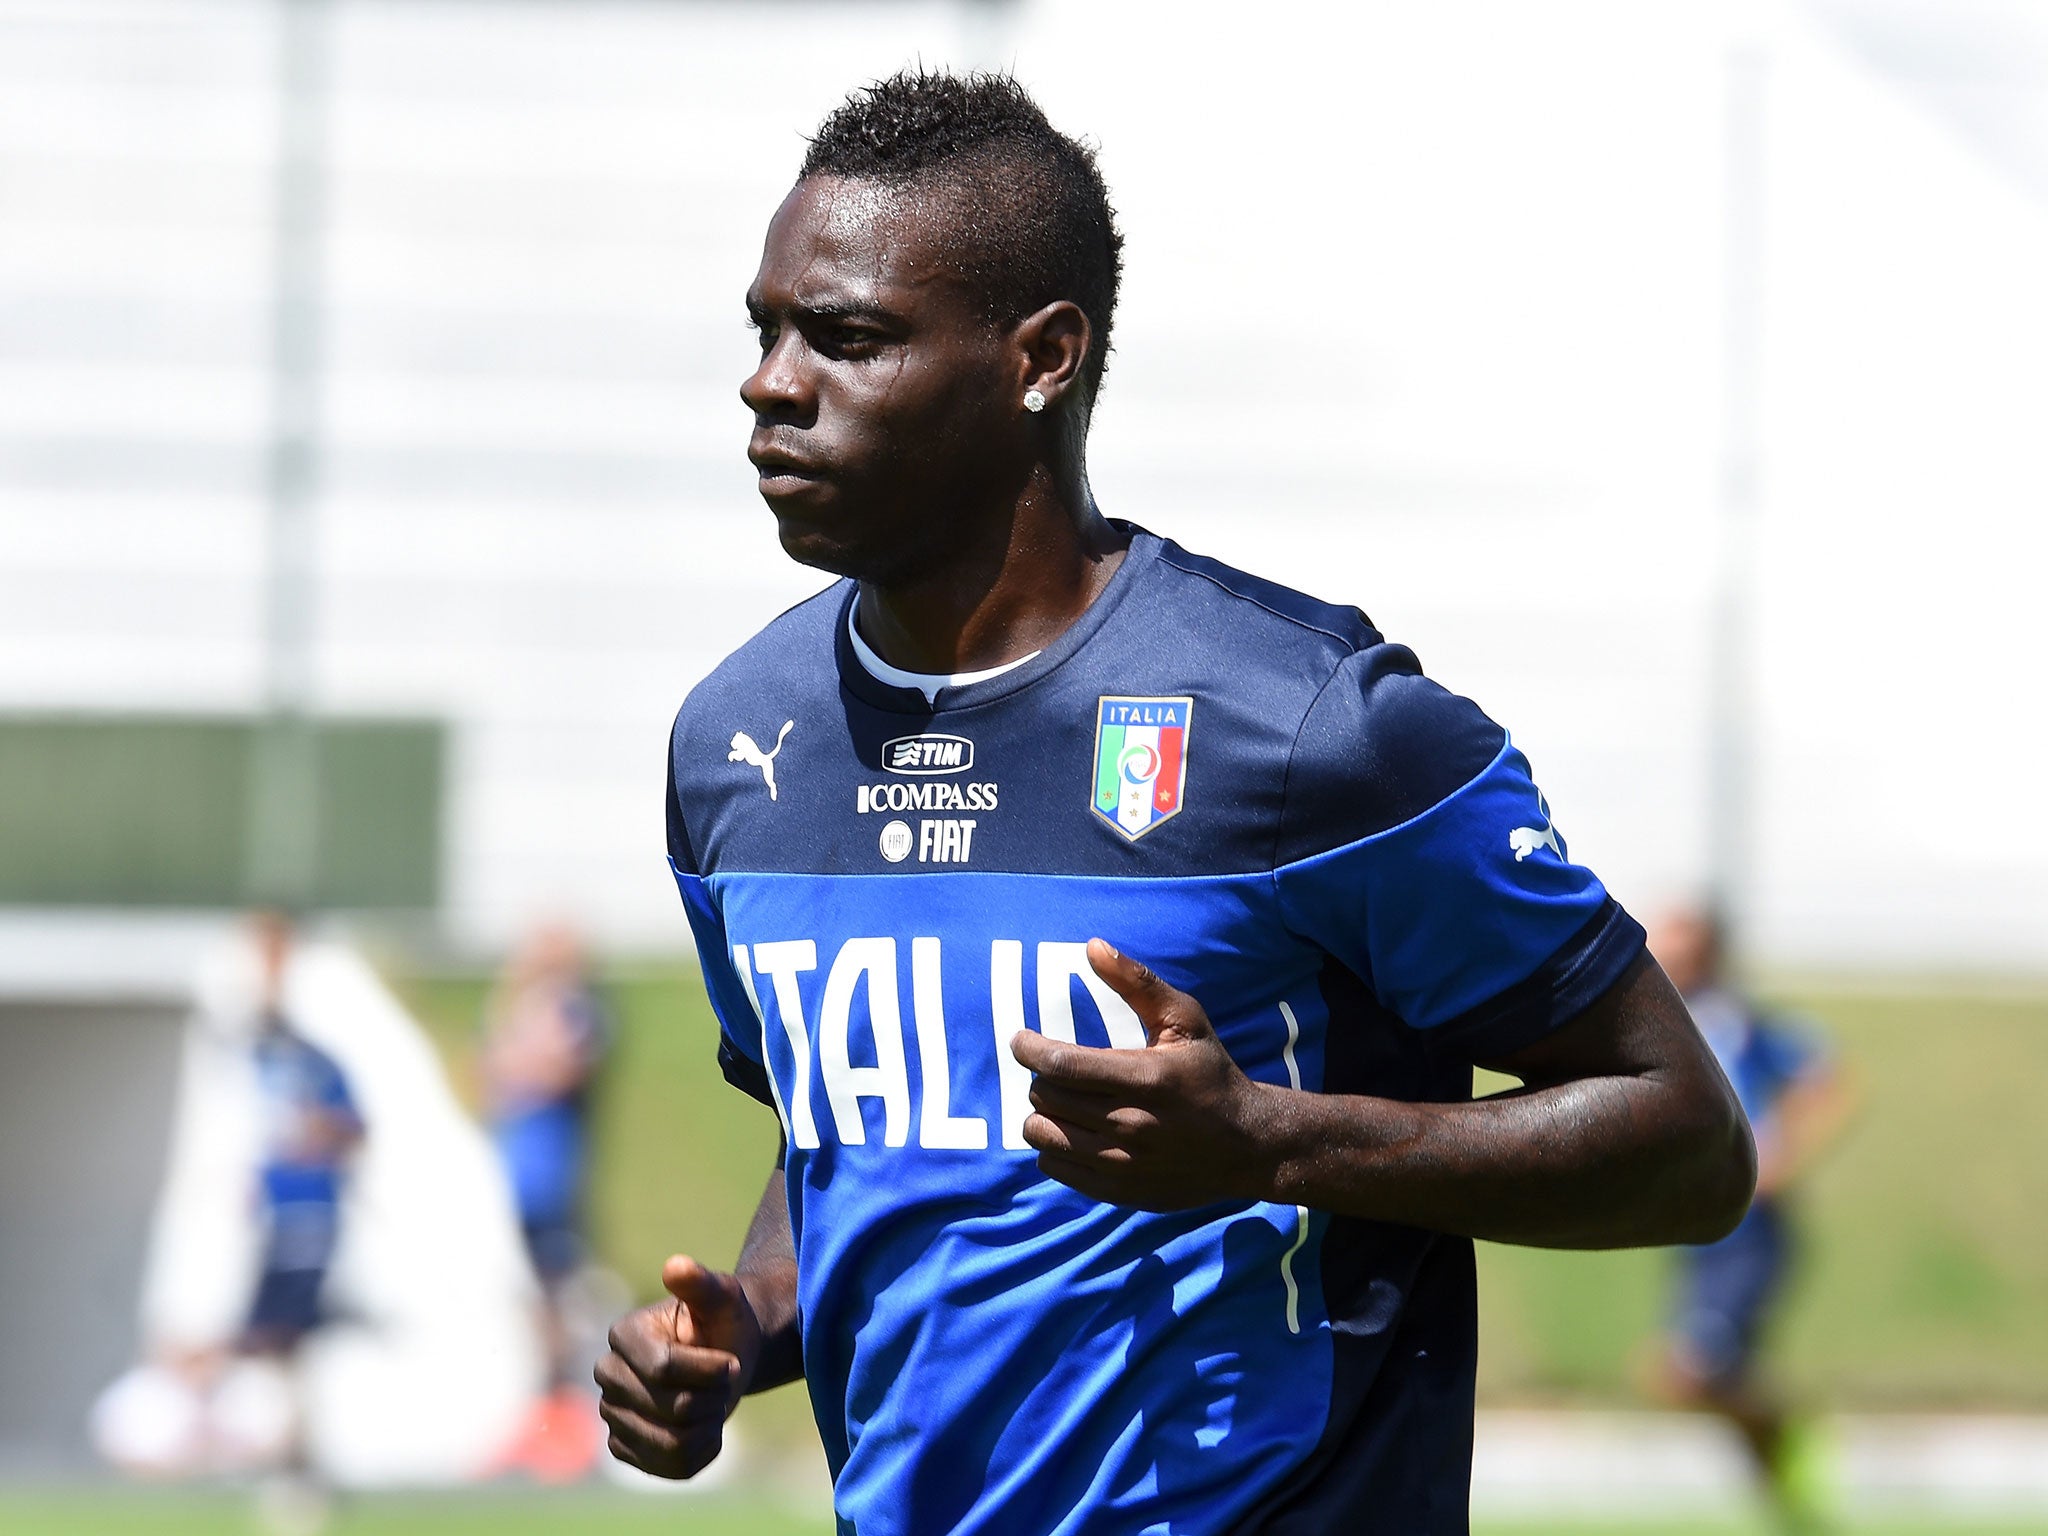 Mario Balotelli is nearing a £16m switch to Liverpool